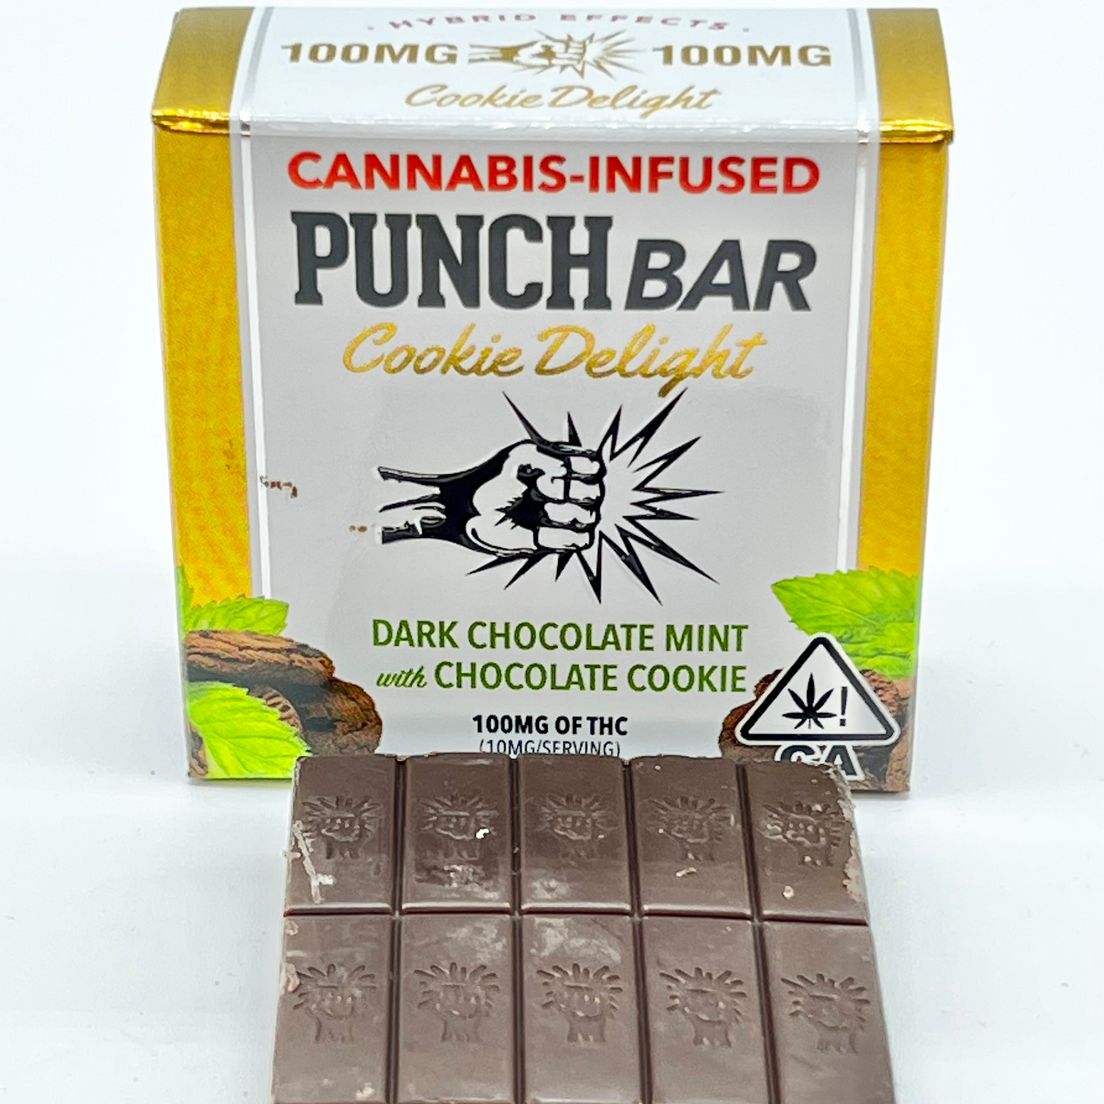 Dark Chocolate Mint & Chocolate Cookie - Edible Bar (THC 100mg) by Punch Edibles